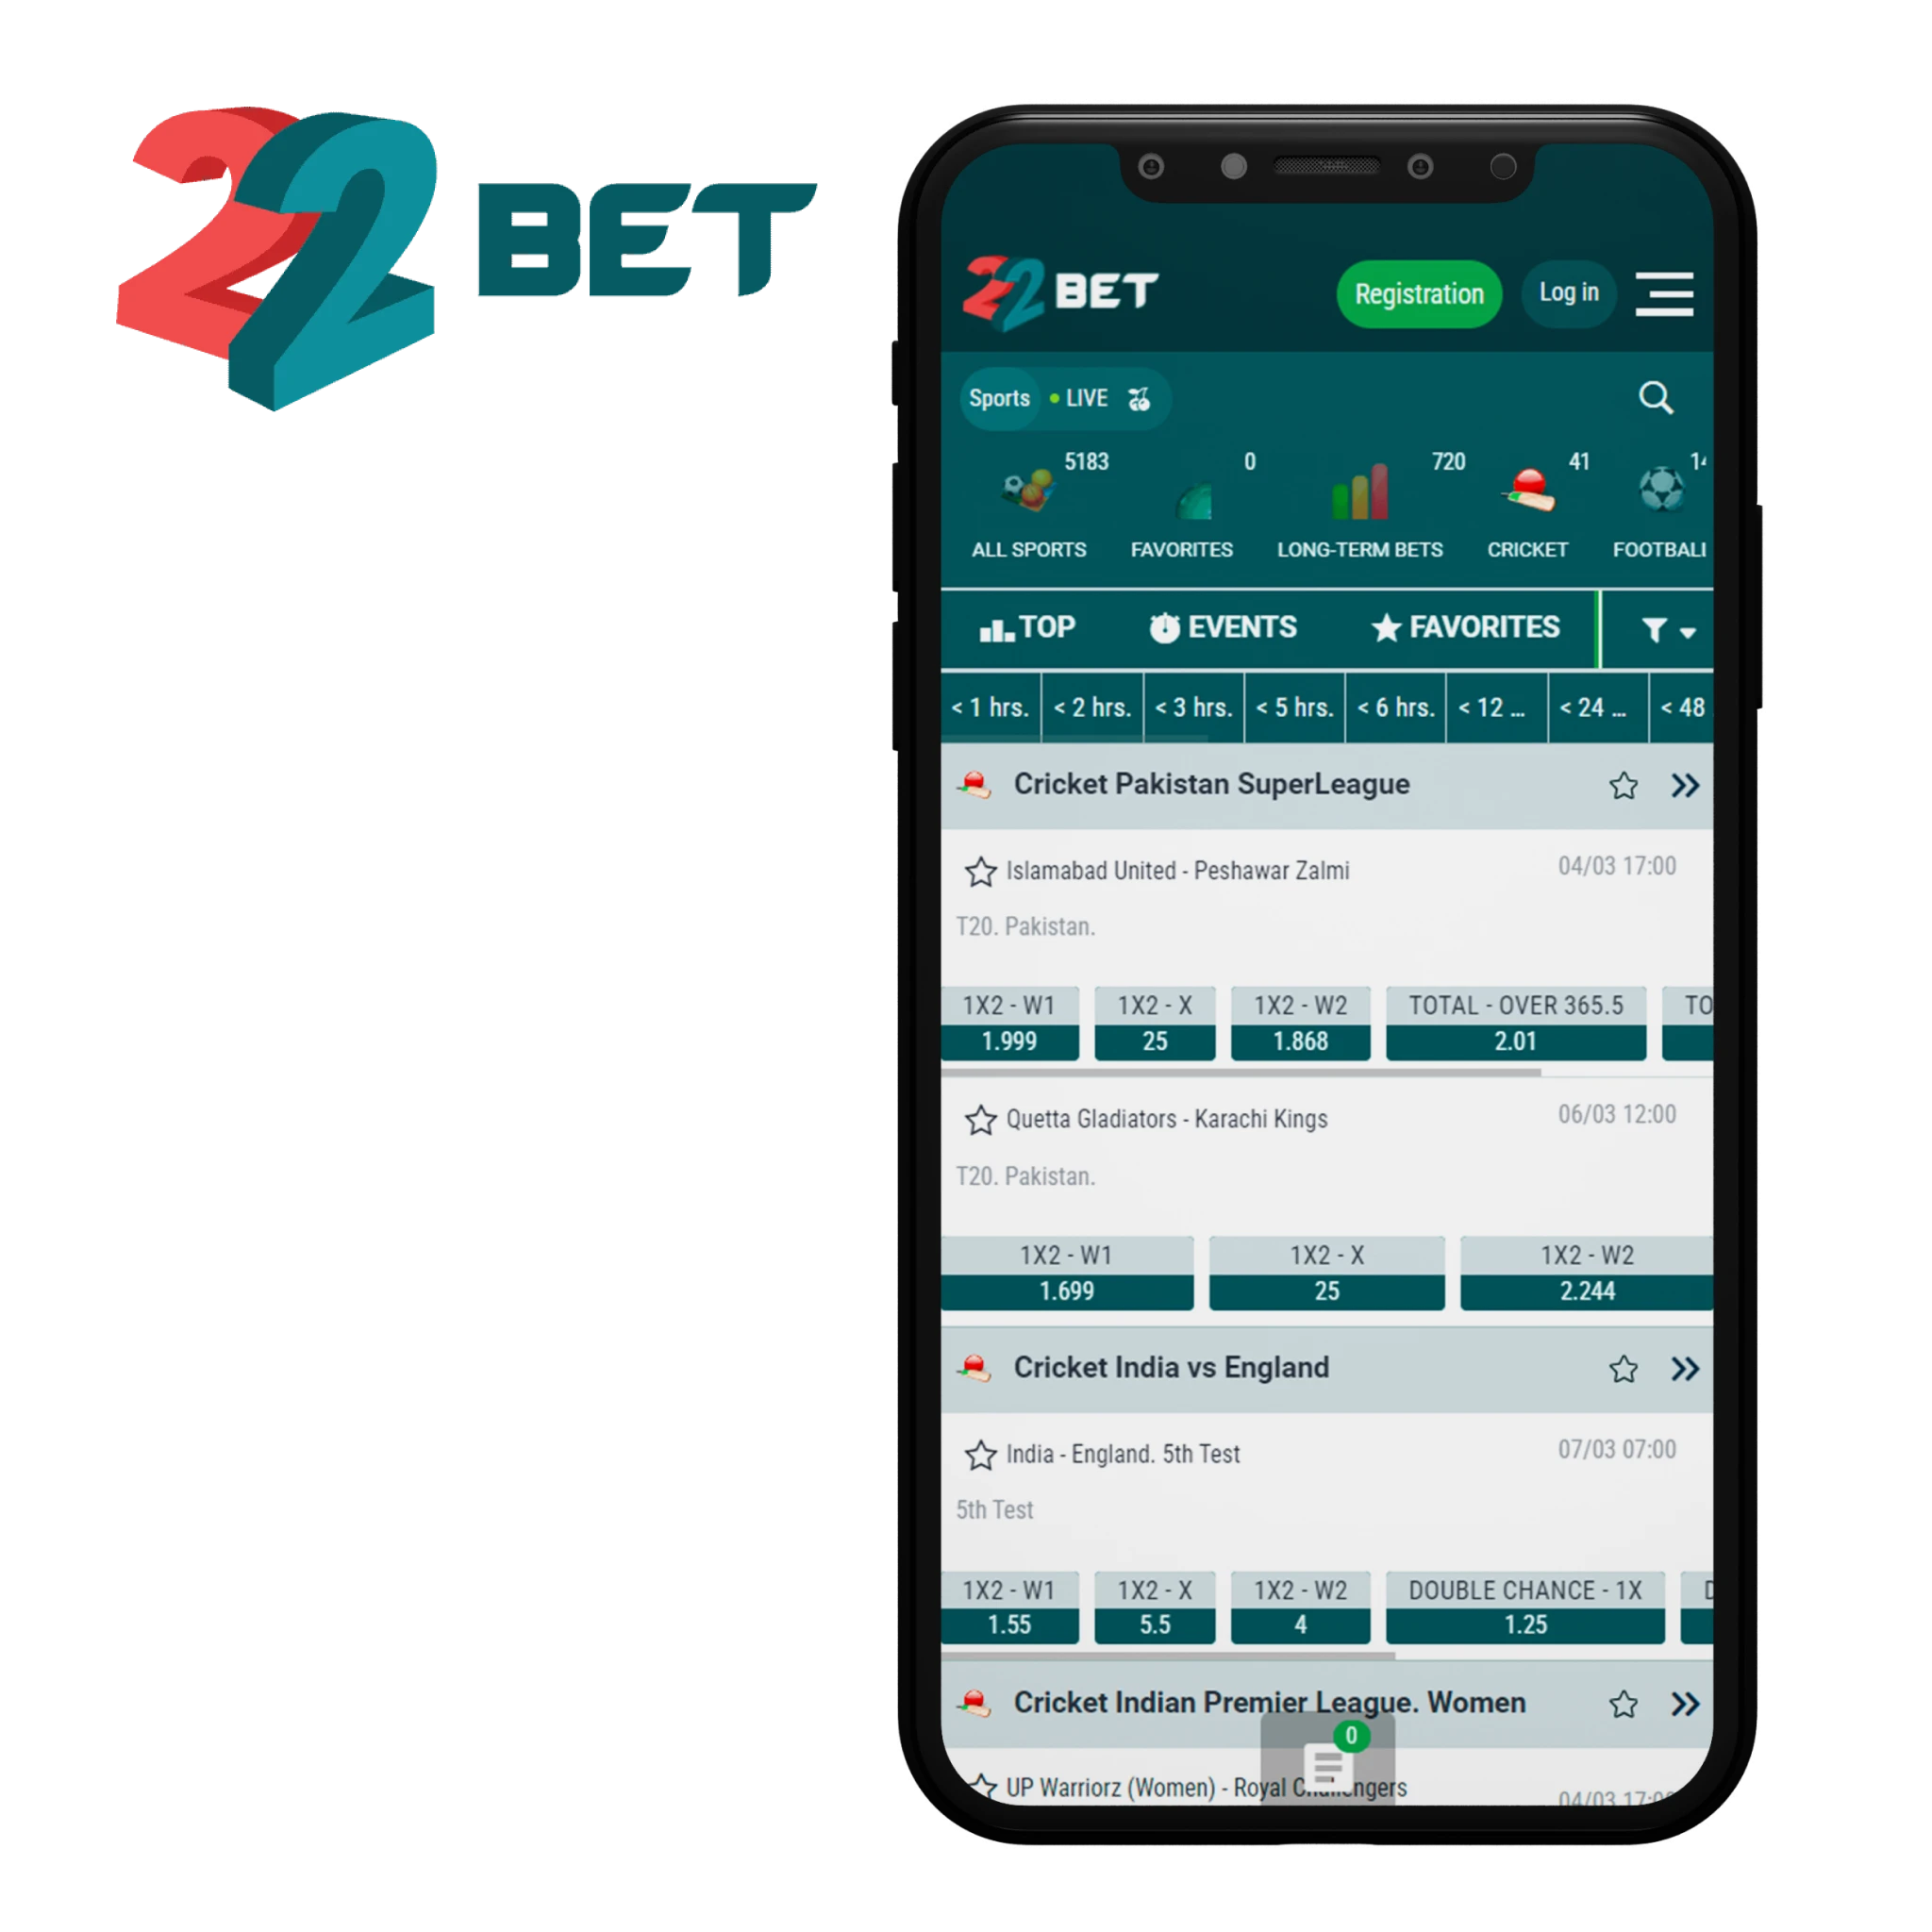 22bet app offers an enormous amont of cricket events to bet on.